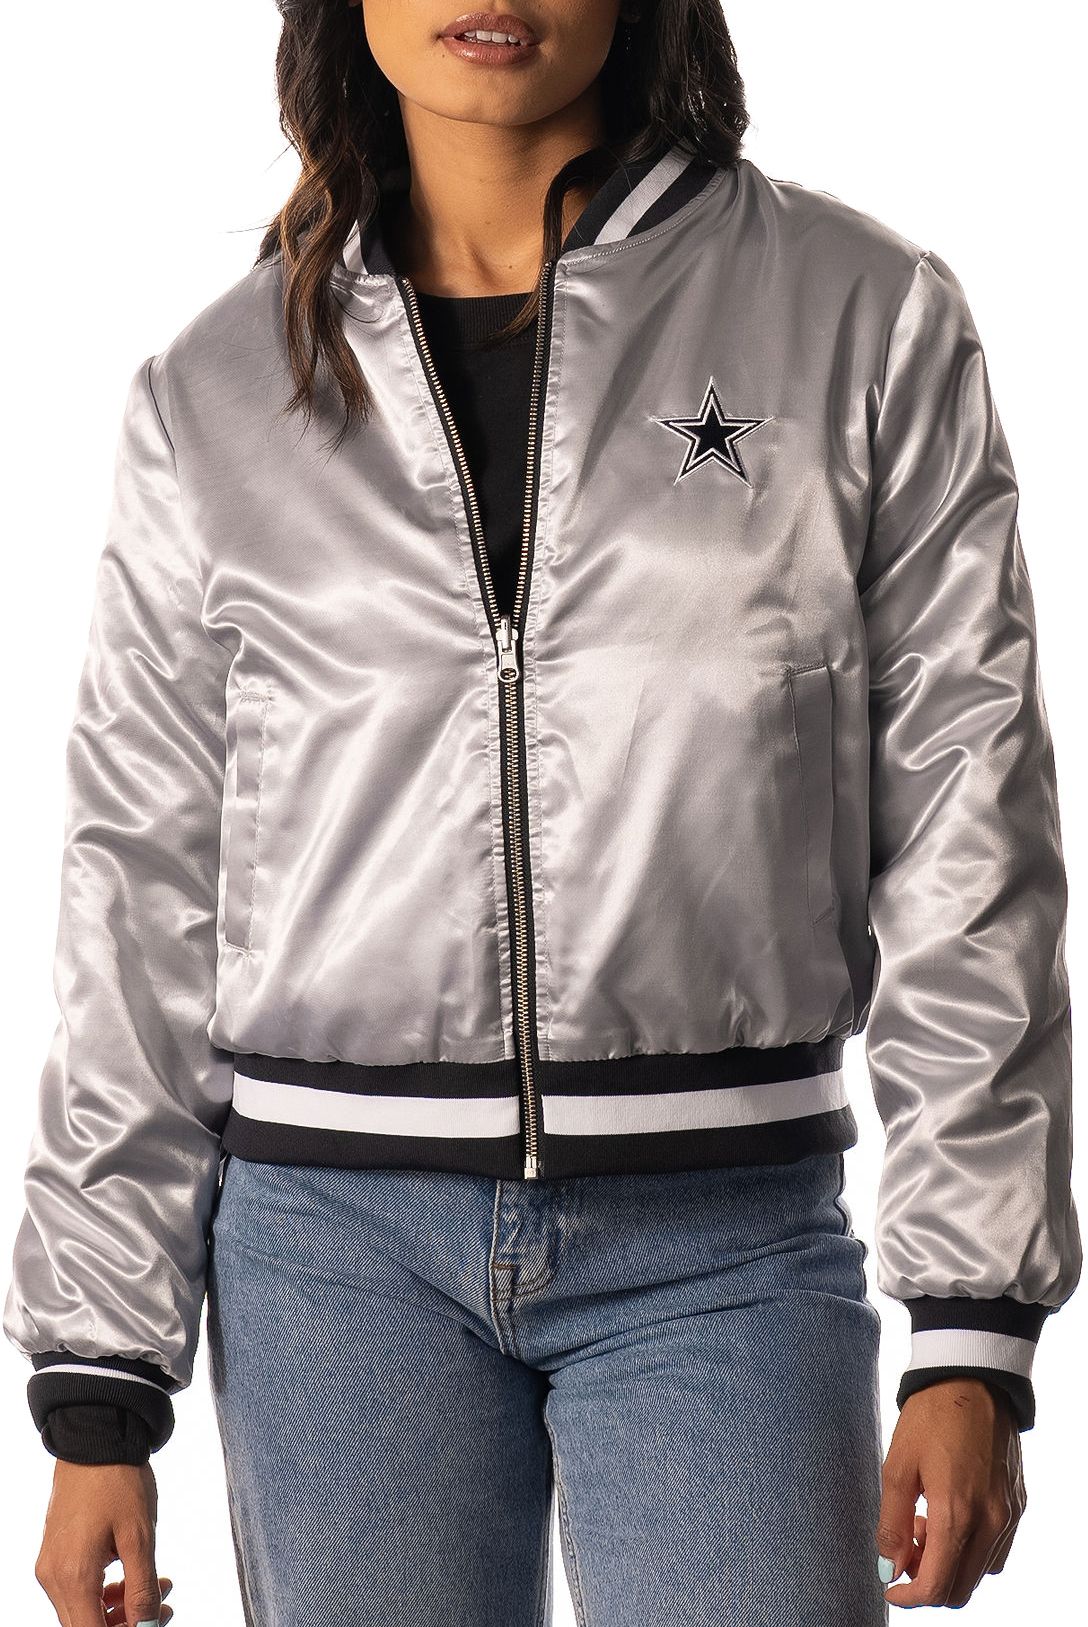 The Wild Collective Women's Dallas Cowboys Grey Reversible Sherpa Bomber Jacket